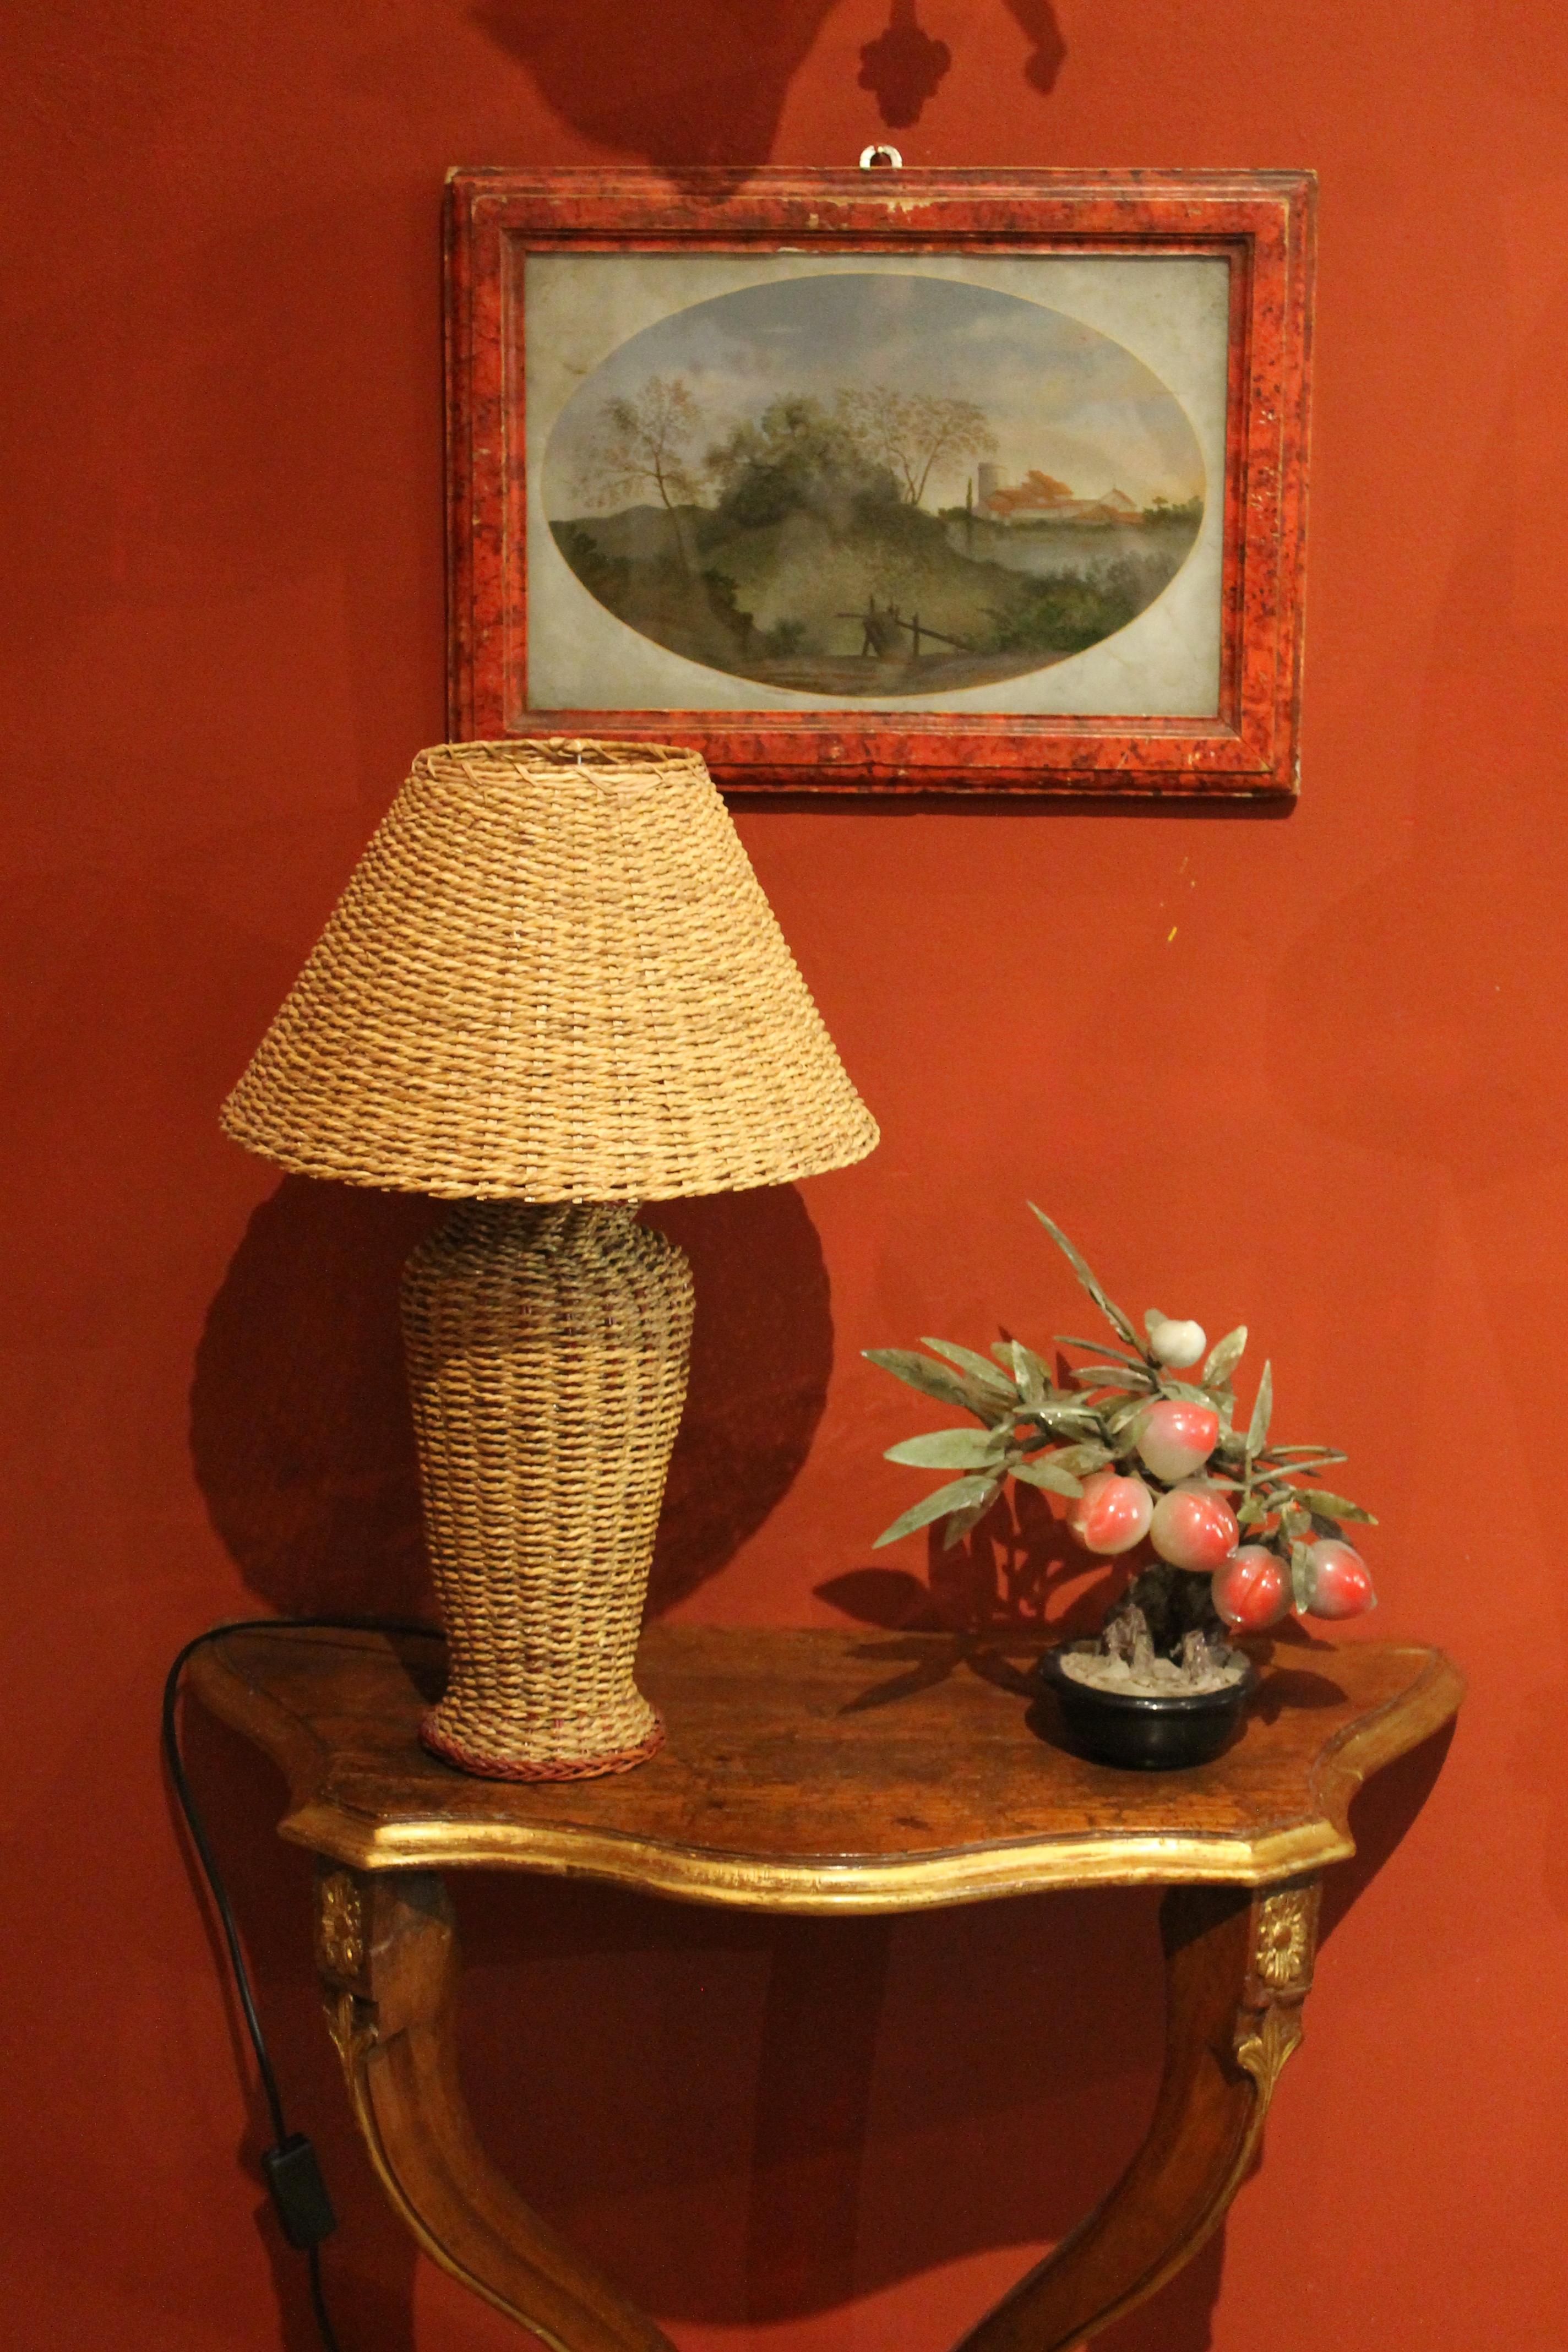 These Italian laced wicker table lamps date to the 1970s. Stylish and chic these unusual light fixtures give value to a natural and universal material, straw or woven cane so much used and loved by Mediterranean peoples.
The wicker, also known as